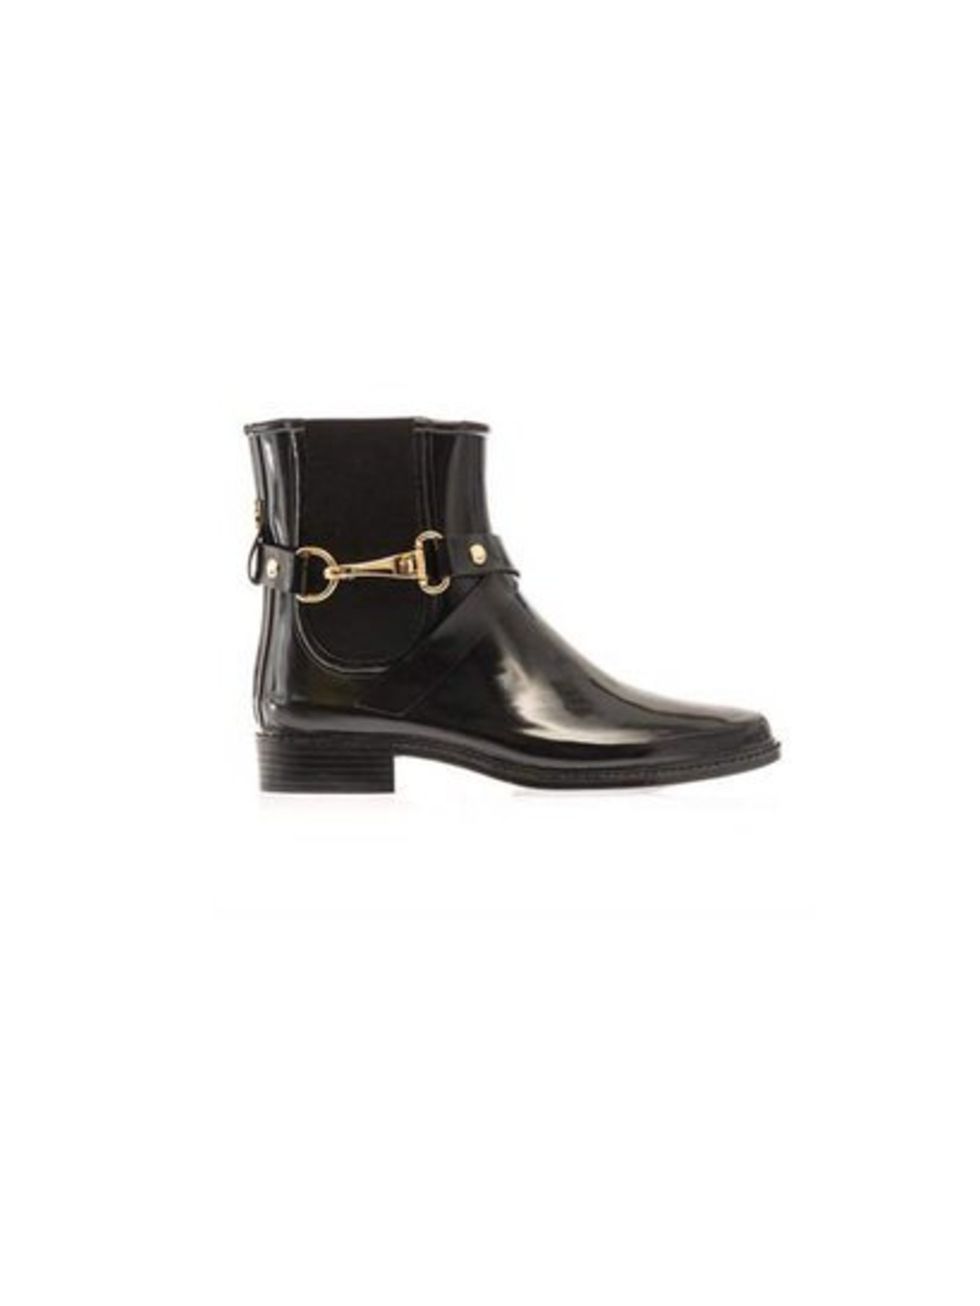 A pair of Wellington boots was never as stylish as these Burberry Brit booties, perfect for the festival season

Burberry Brit, £250 available at Matches